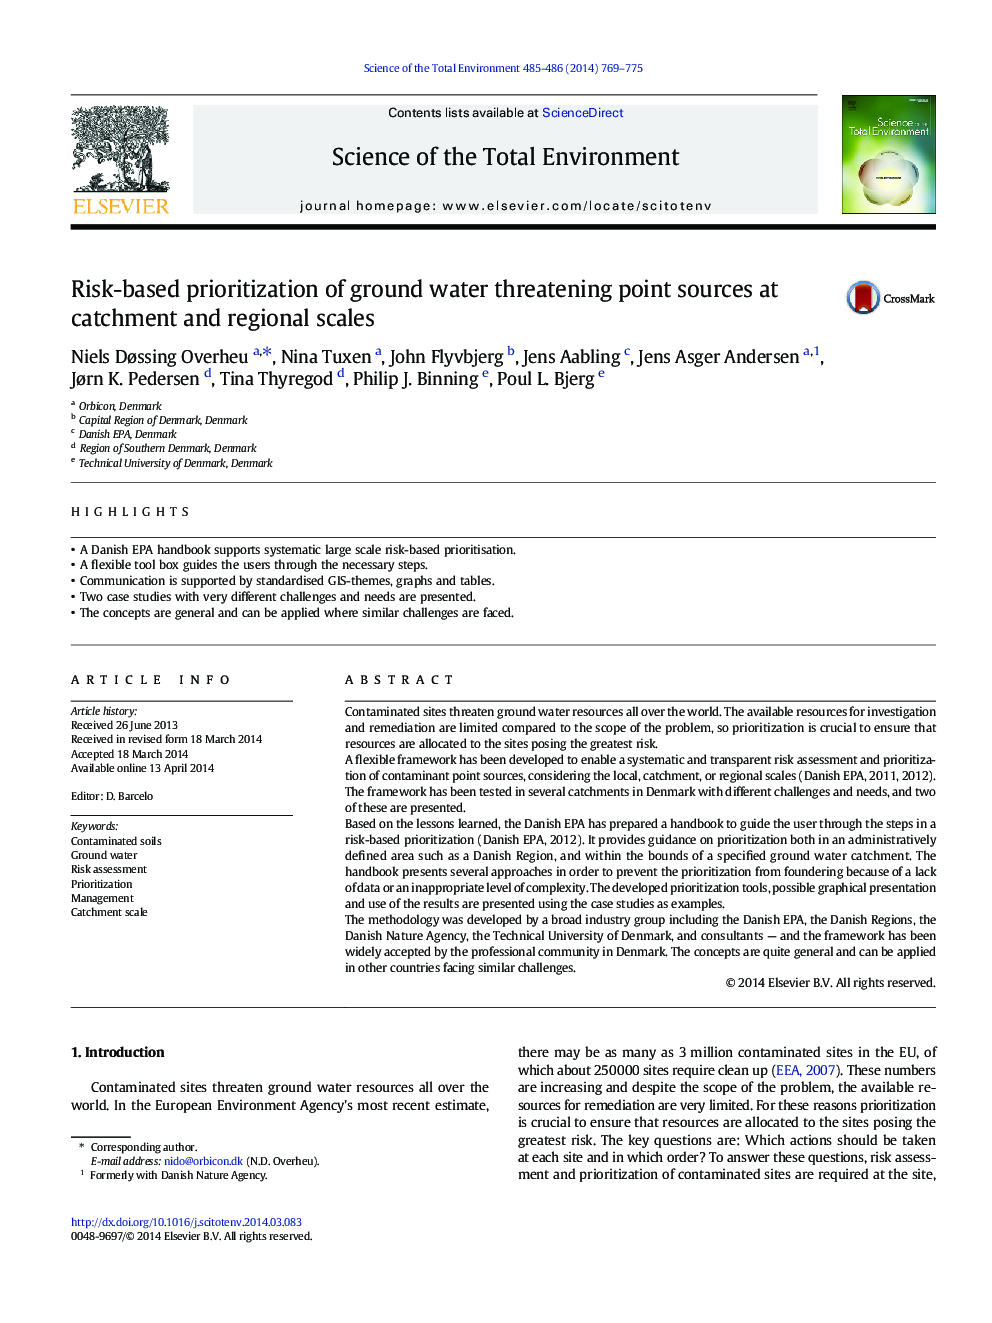 Risk-based prioritization of ground water threatening point sources at catchment and regional scales